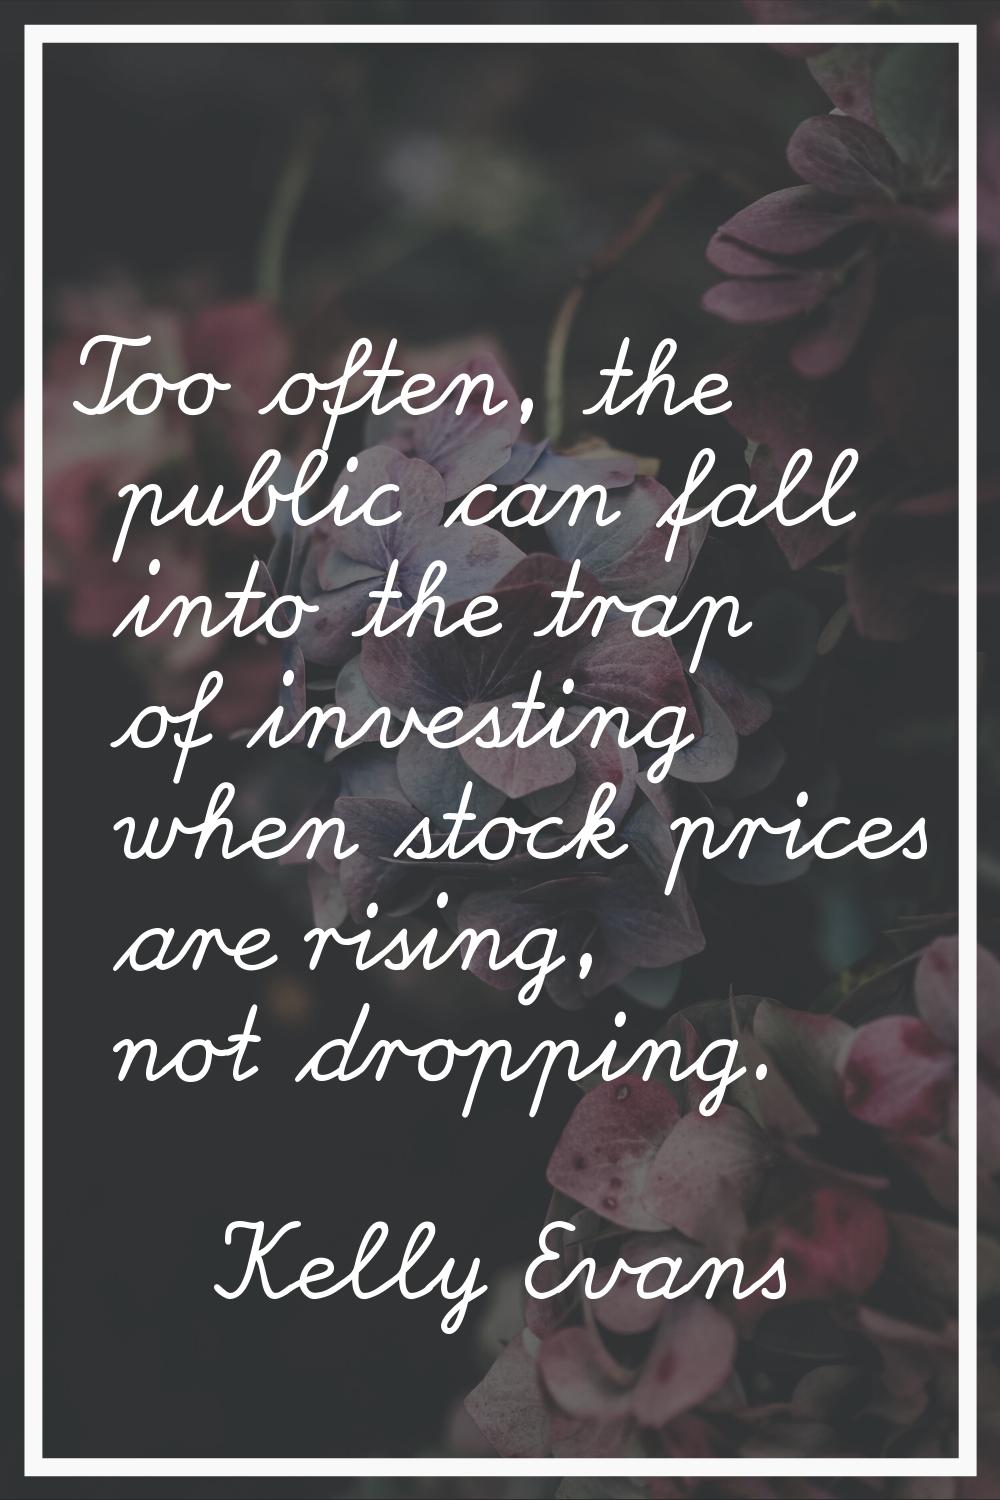 Too often, the public can fall into the trap of investing when stock prices are rising, not droppin